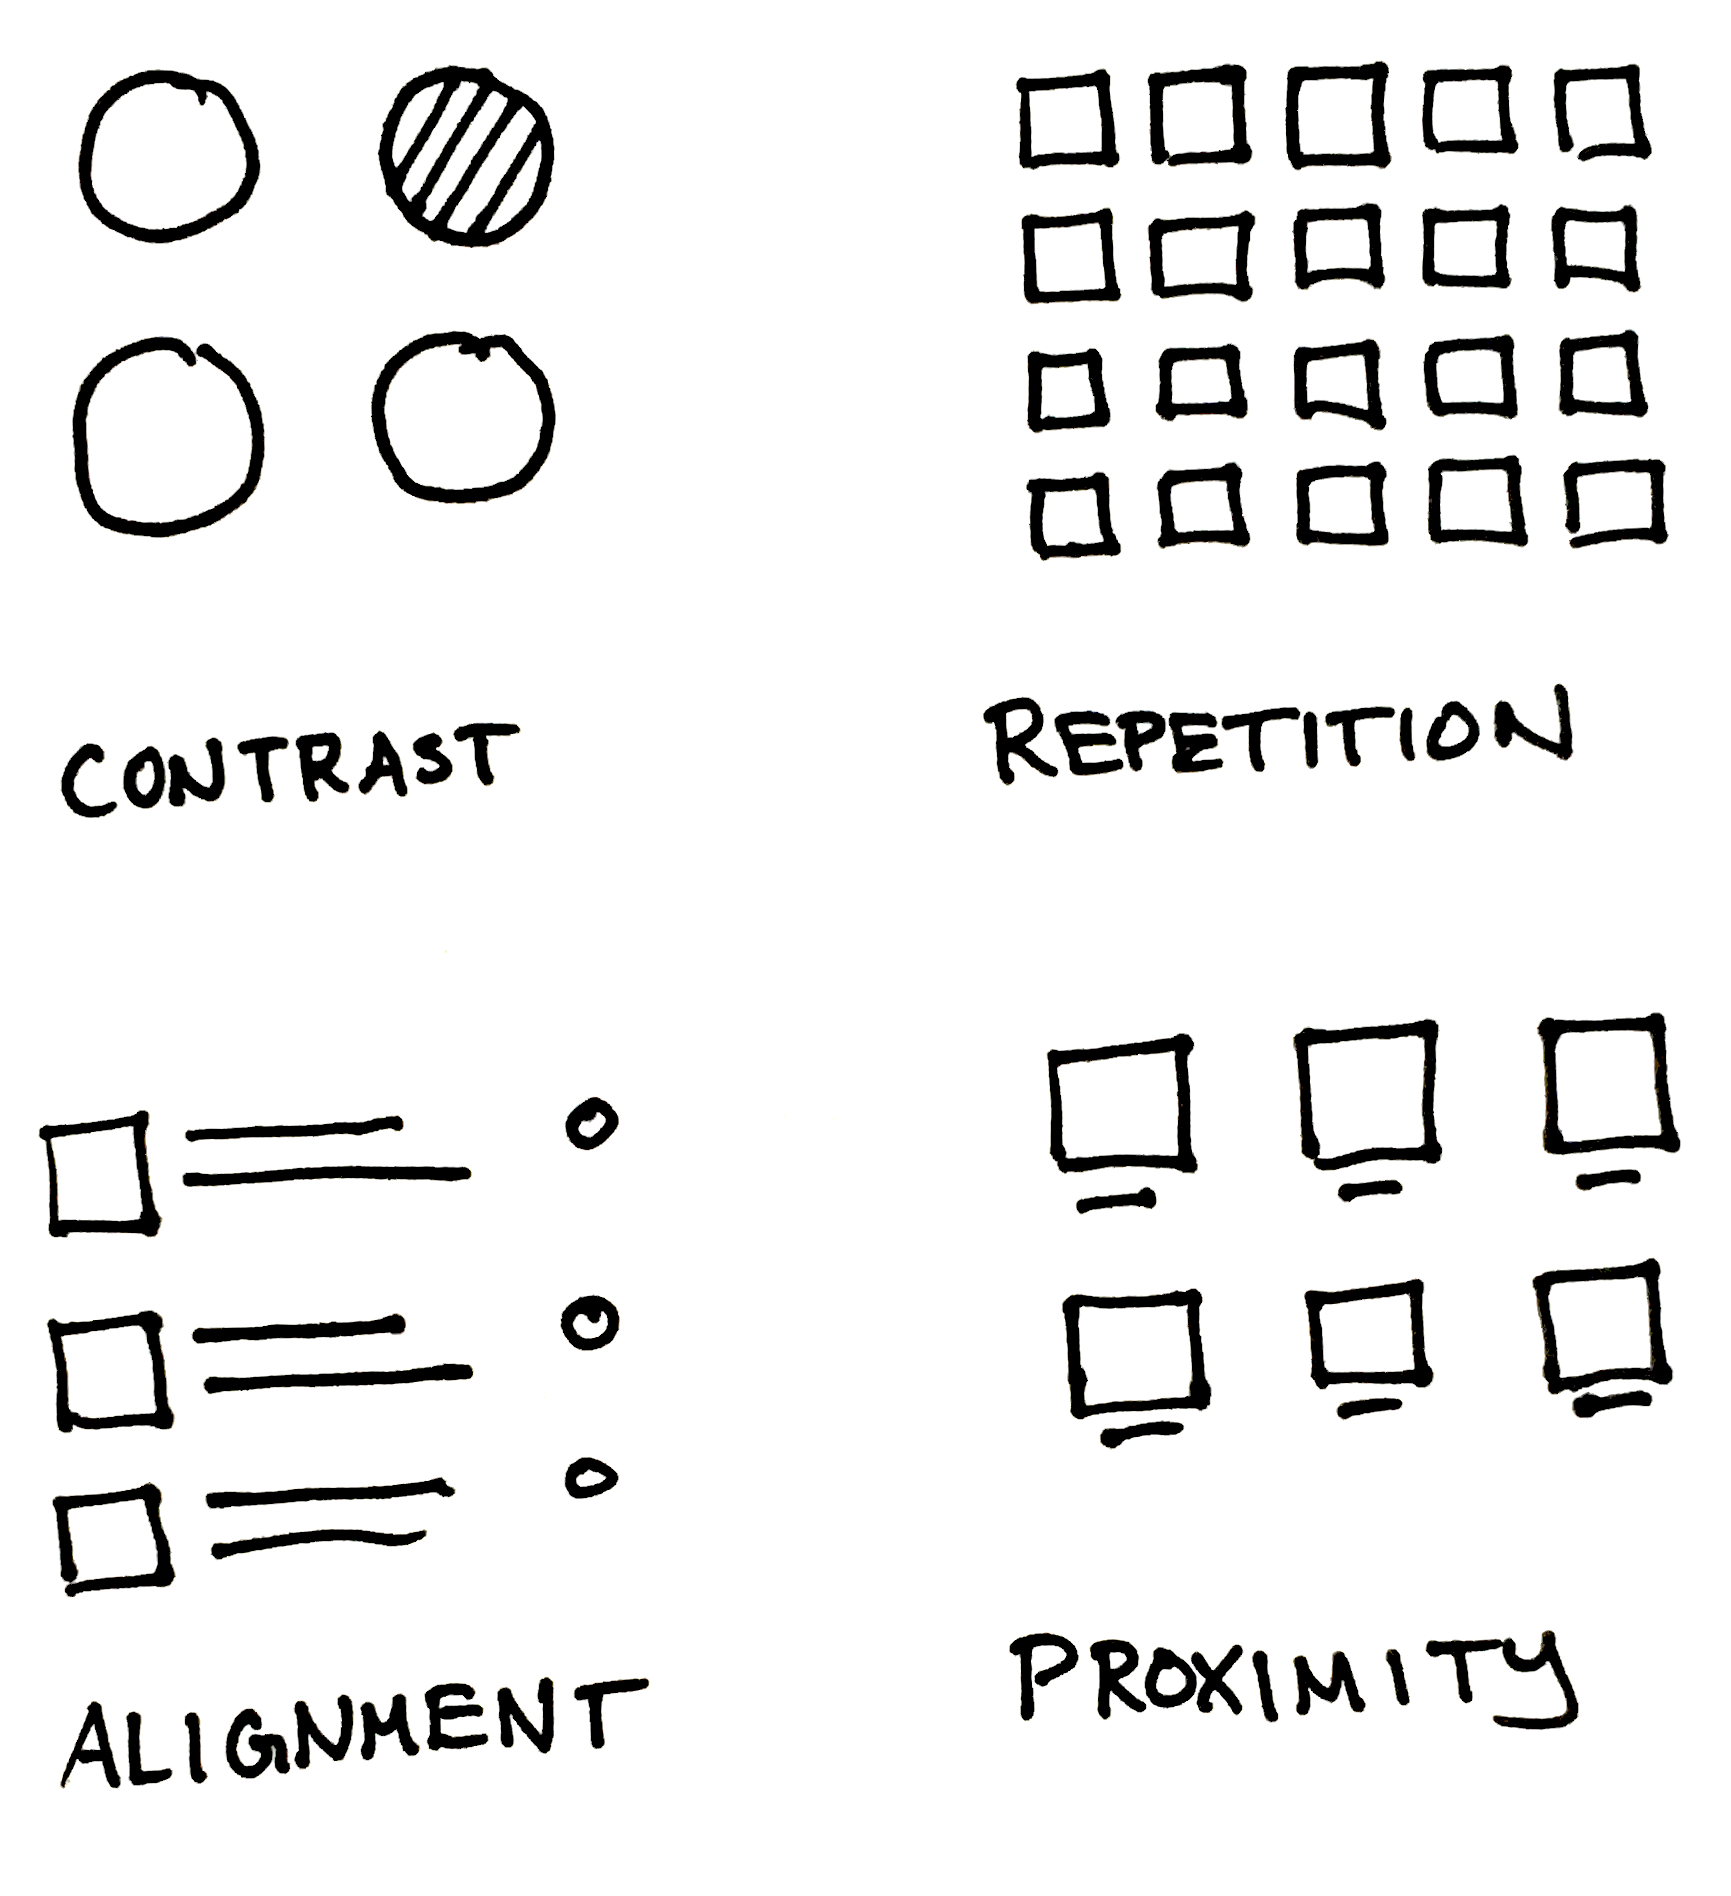 Illustration of CRAP design principles: contrast, repetition, alignment, and proximity